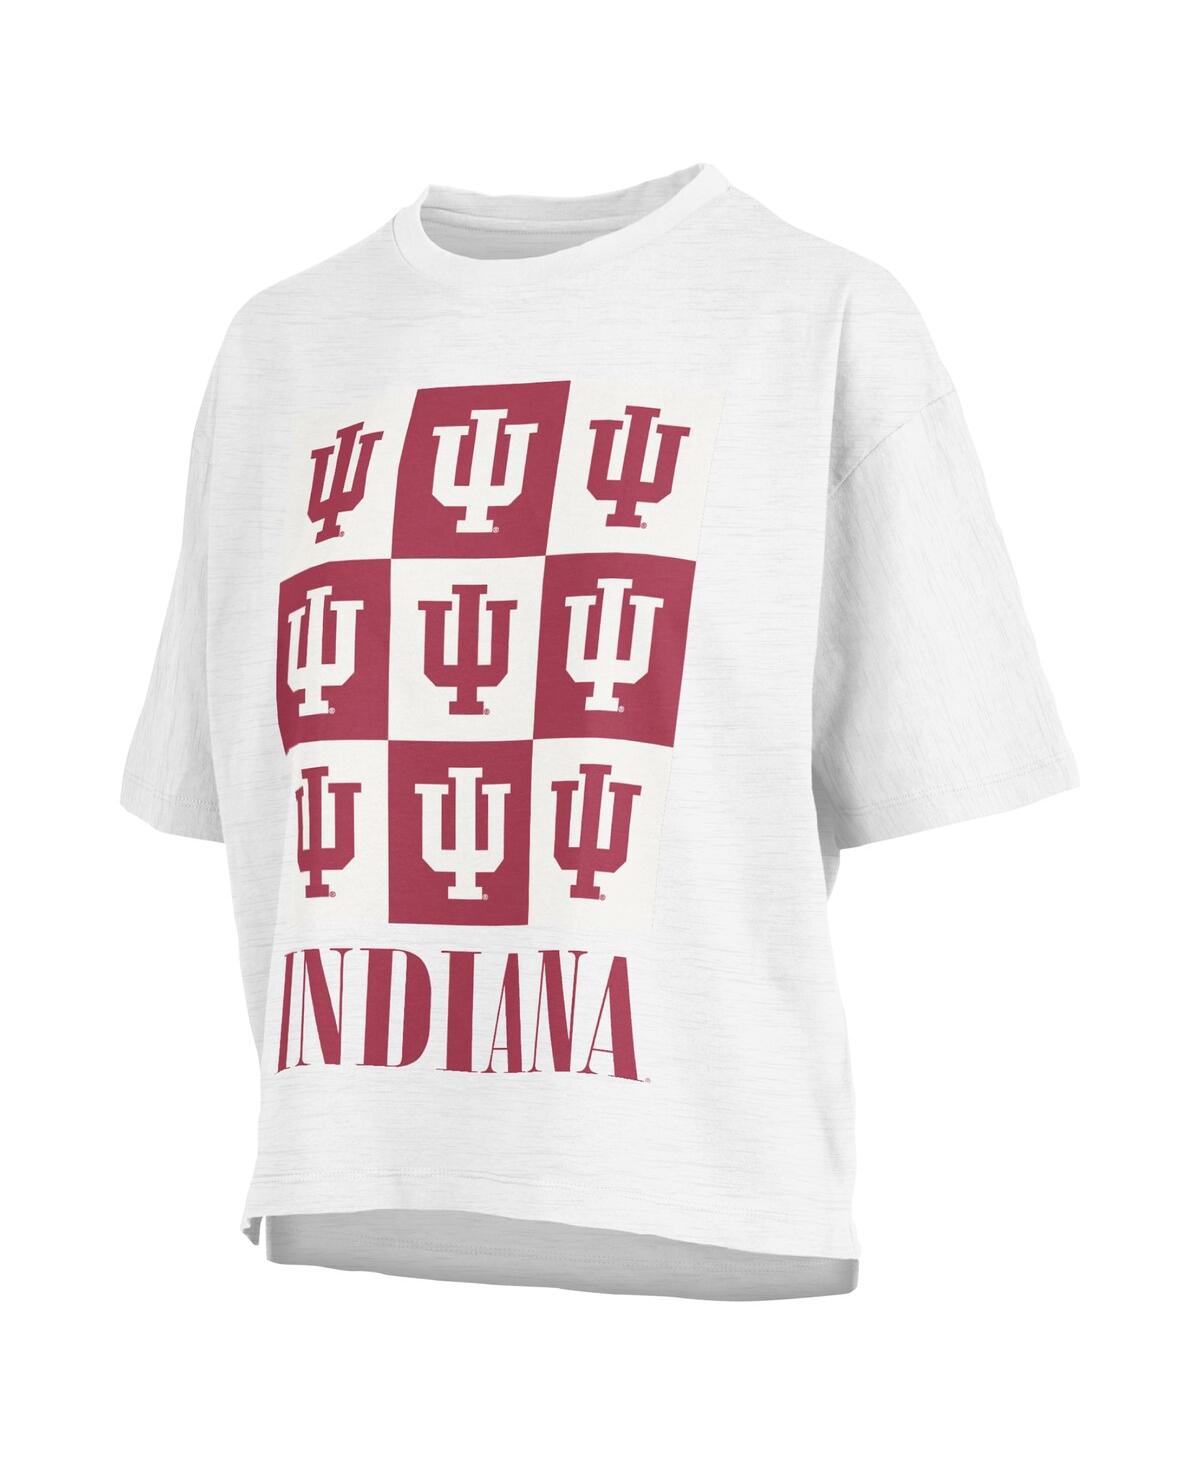 Shop Pressbox Women's  White Distressed Indiana Hoosiers Motley Crew Andy Waist Length Oversized T-shirt